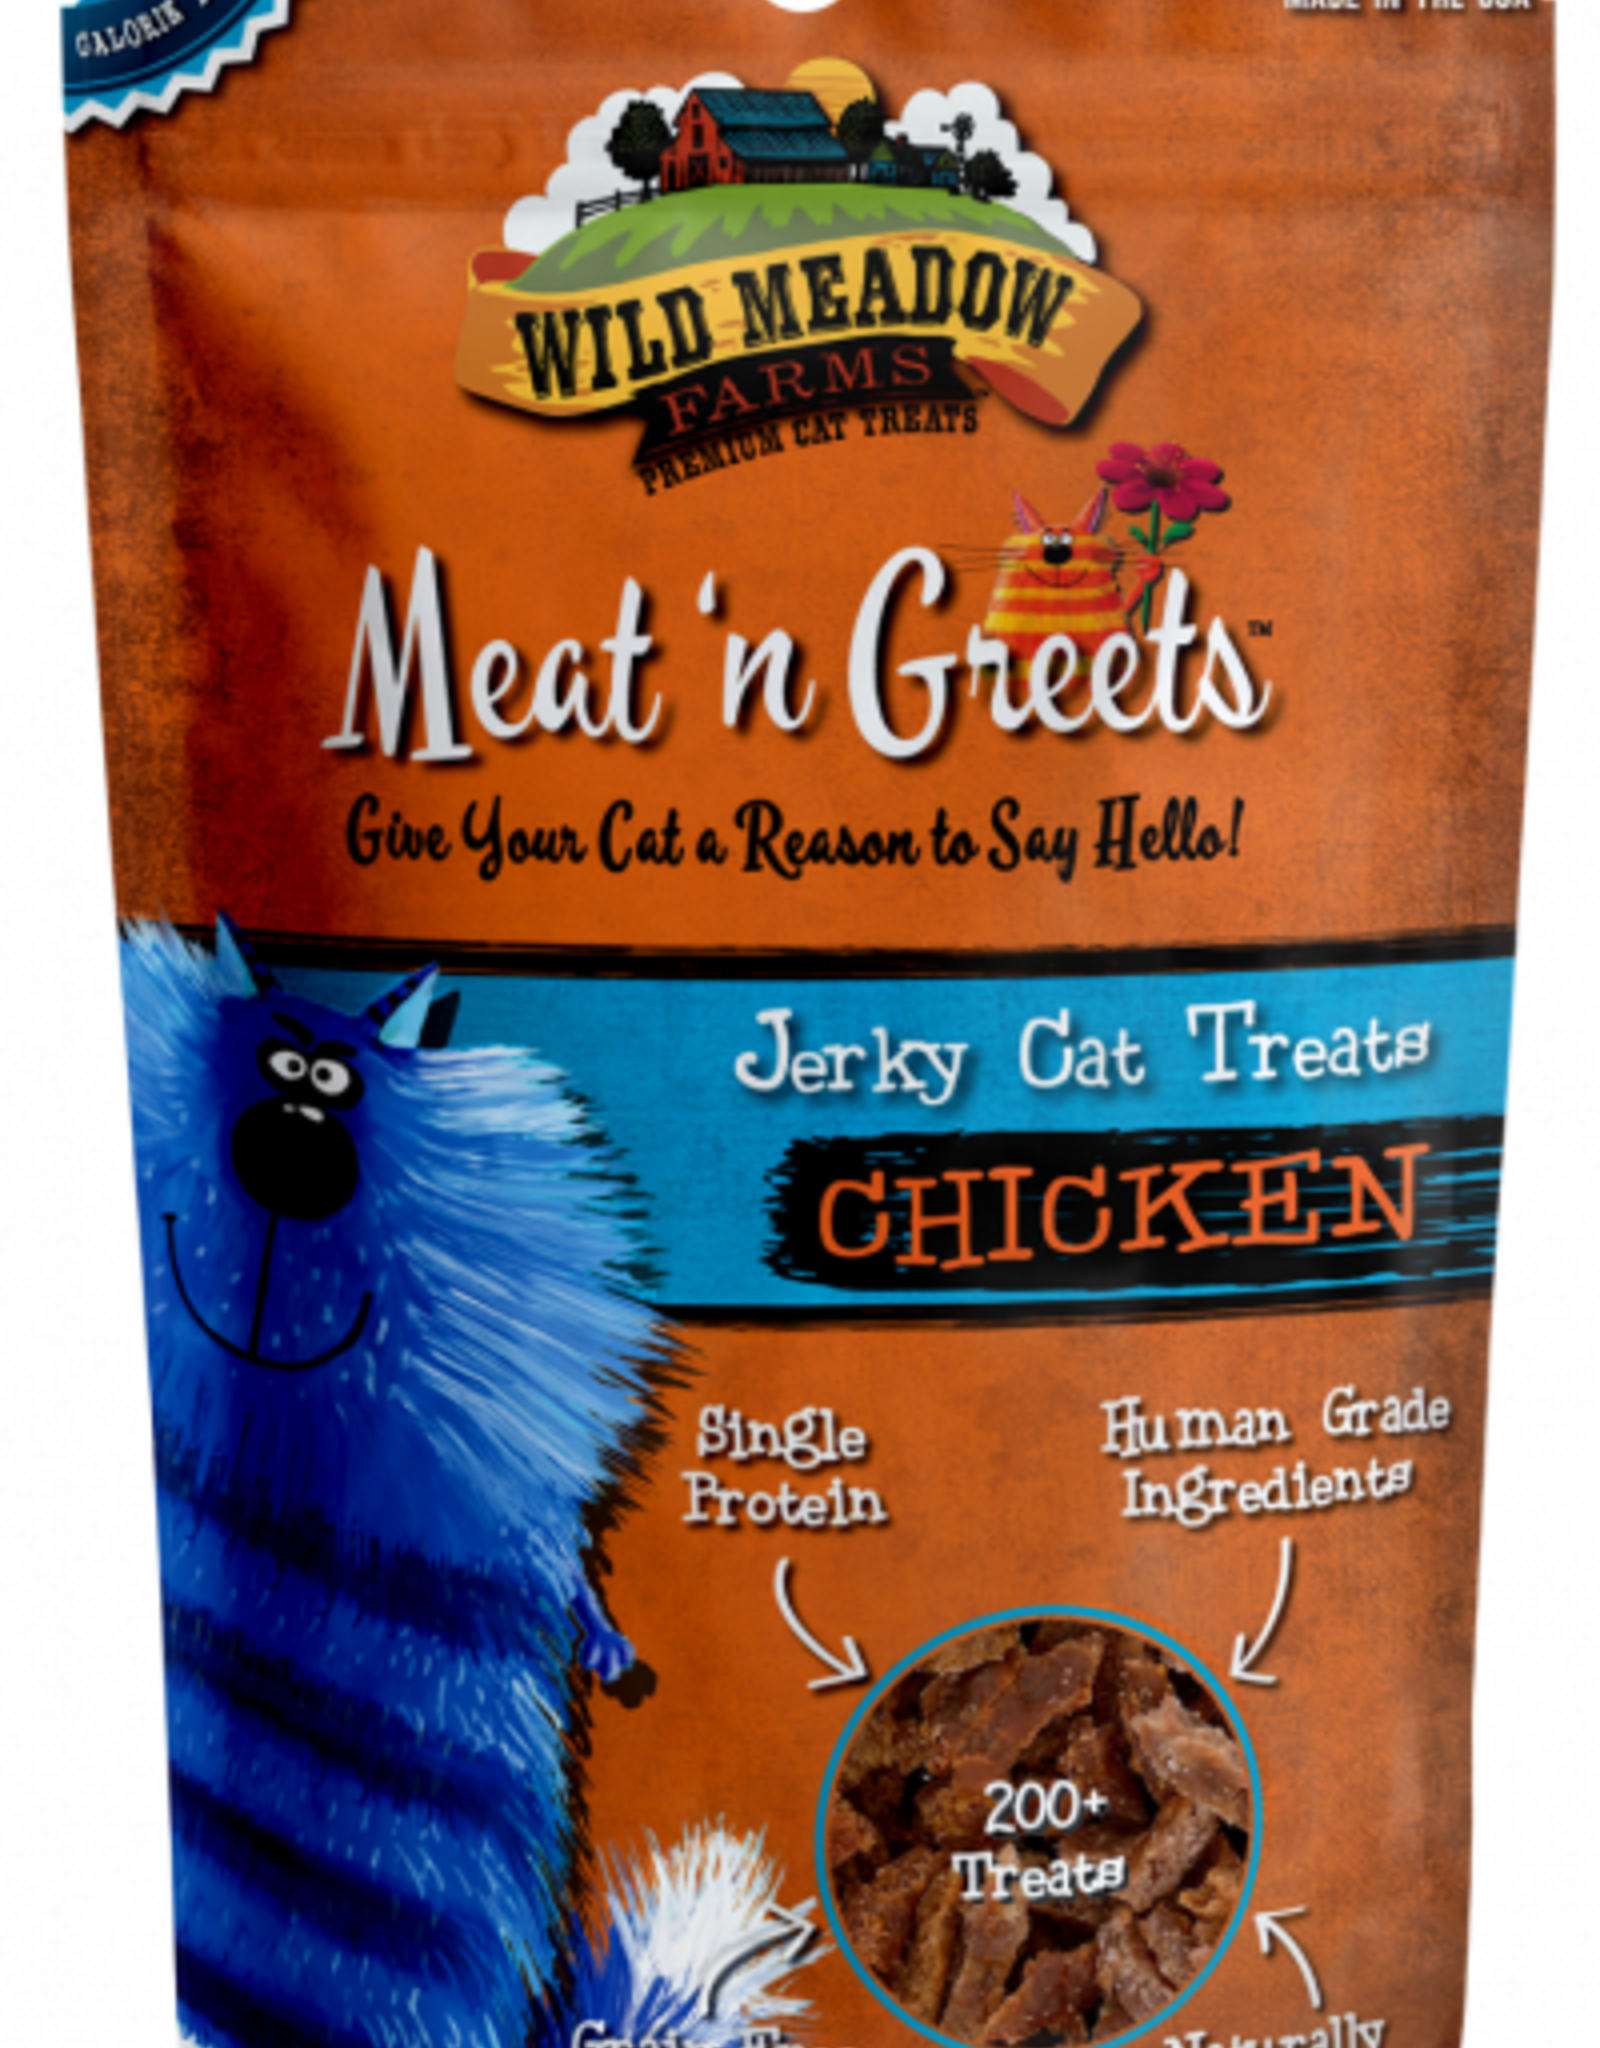 Wild Meadow Farms MeatNGreets Chicken